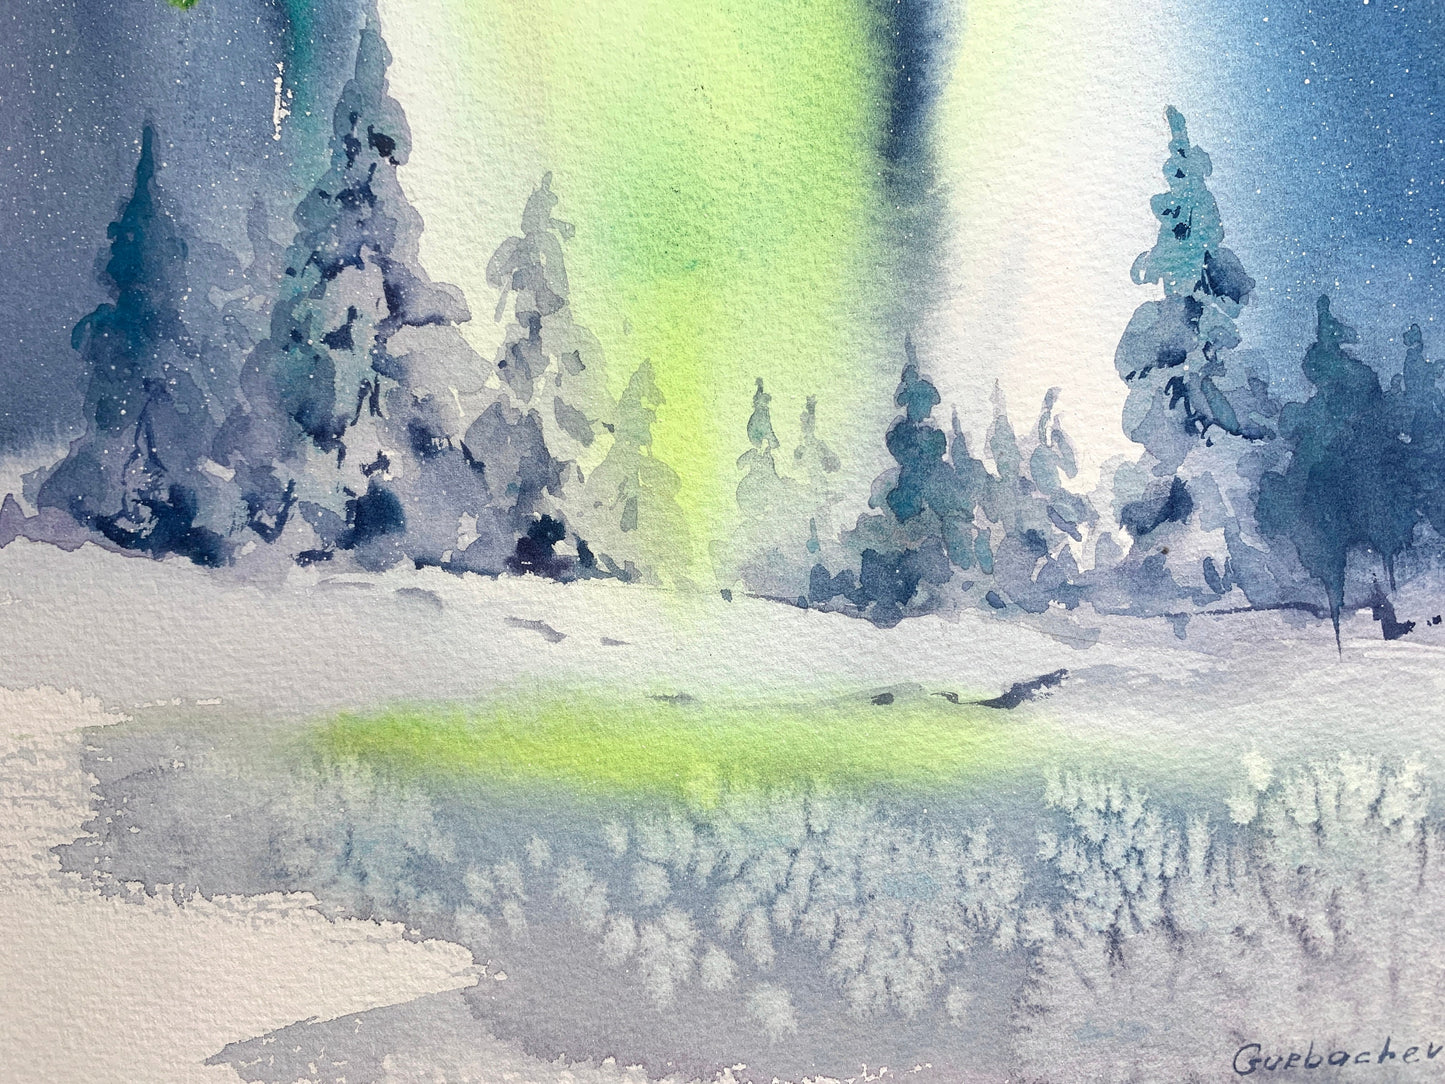 Aurora Borealis Watercolor Painting Original, Nordic Wall Art, Winter Landscape, Northern lights, Ice & Snow, Small Painting, Christmas Gift